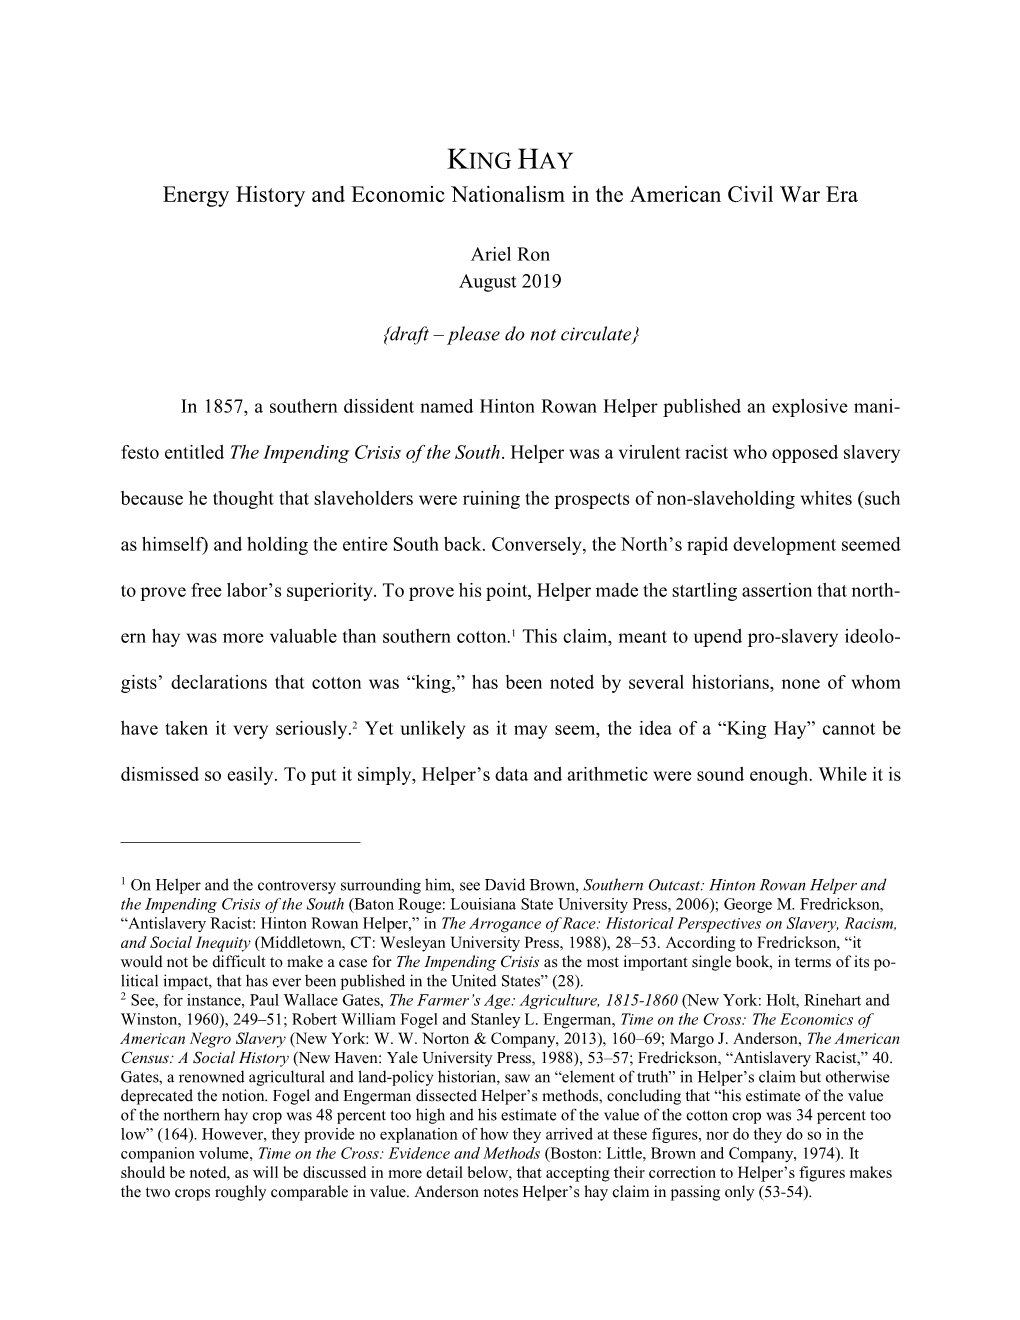 KING HAY Energy History and Economic Nationalism in the American Civil War Era